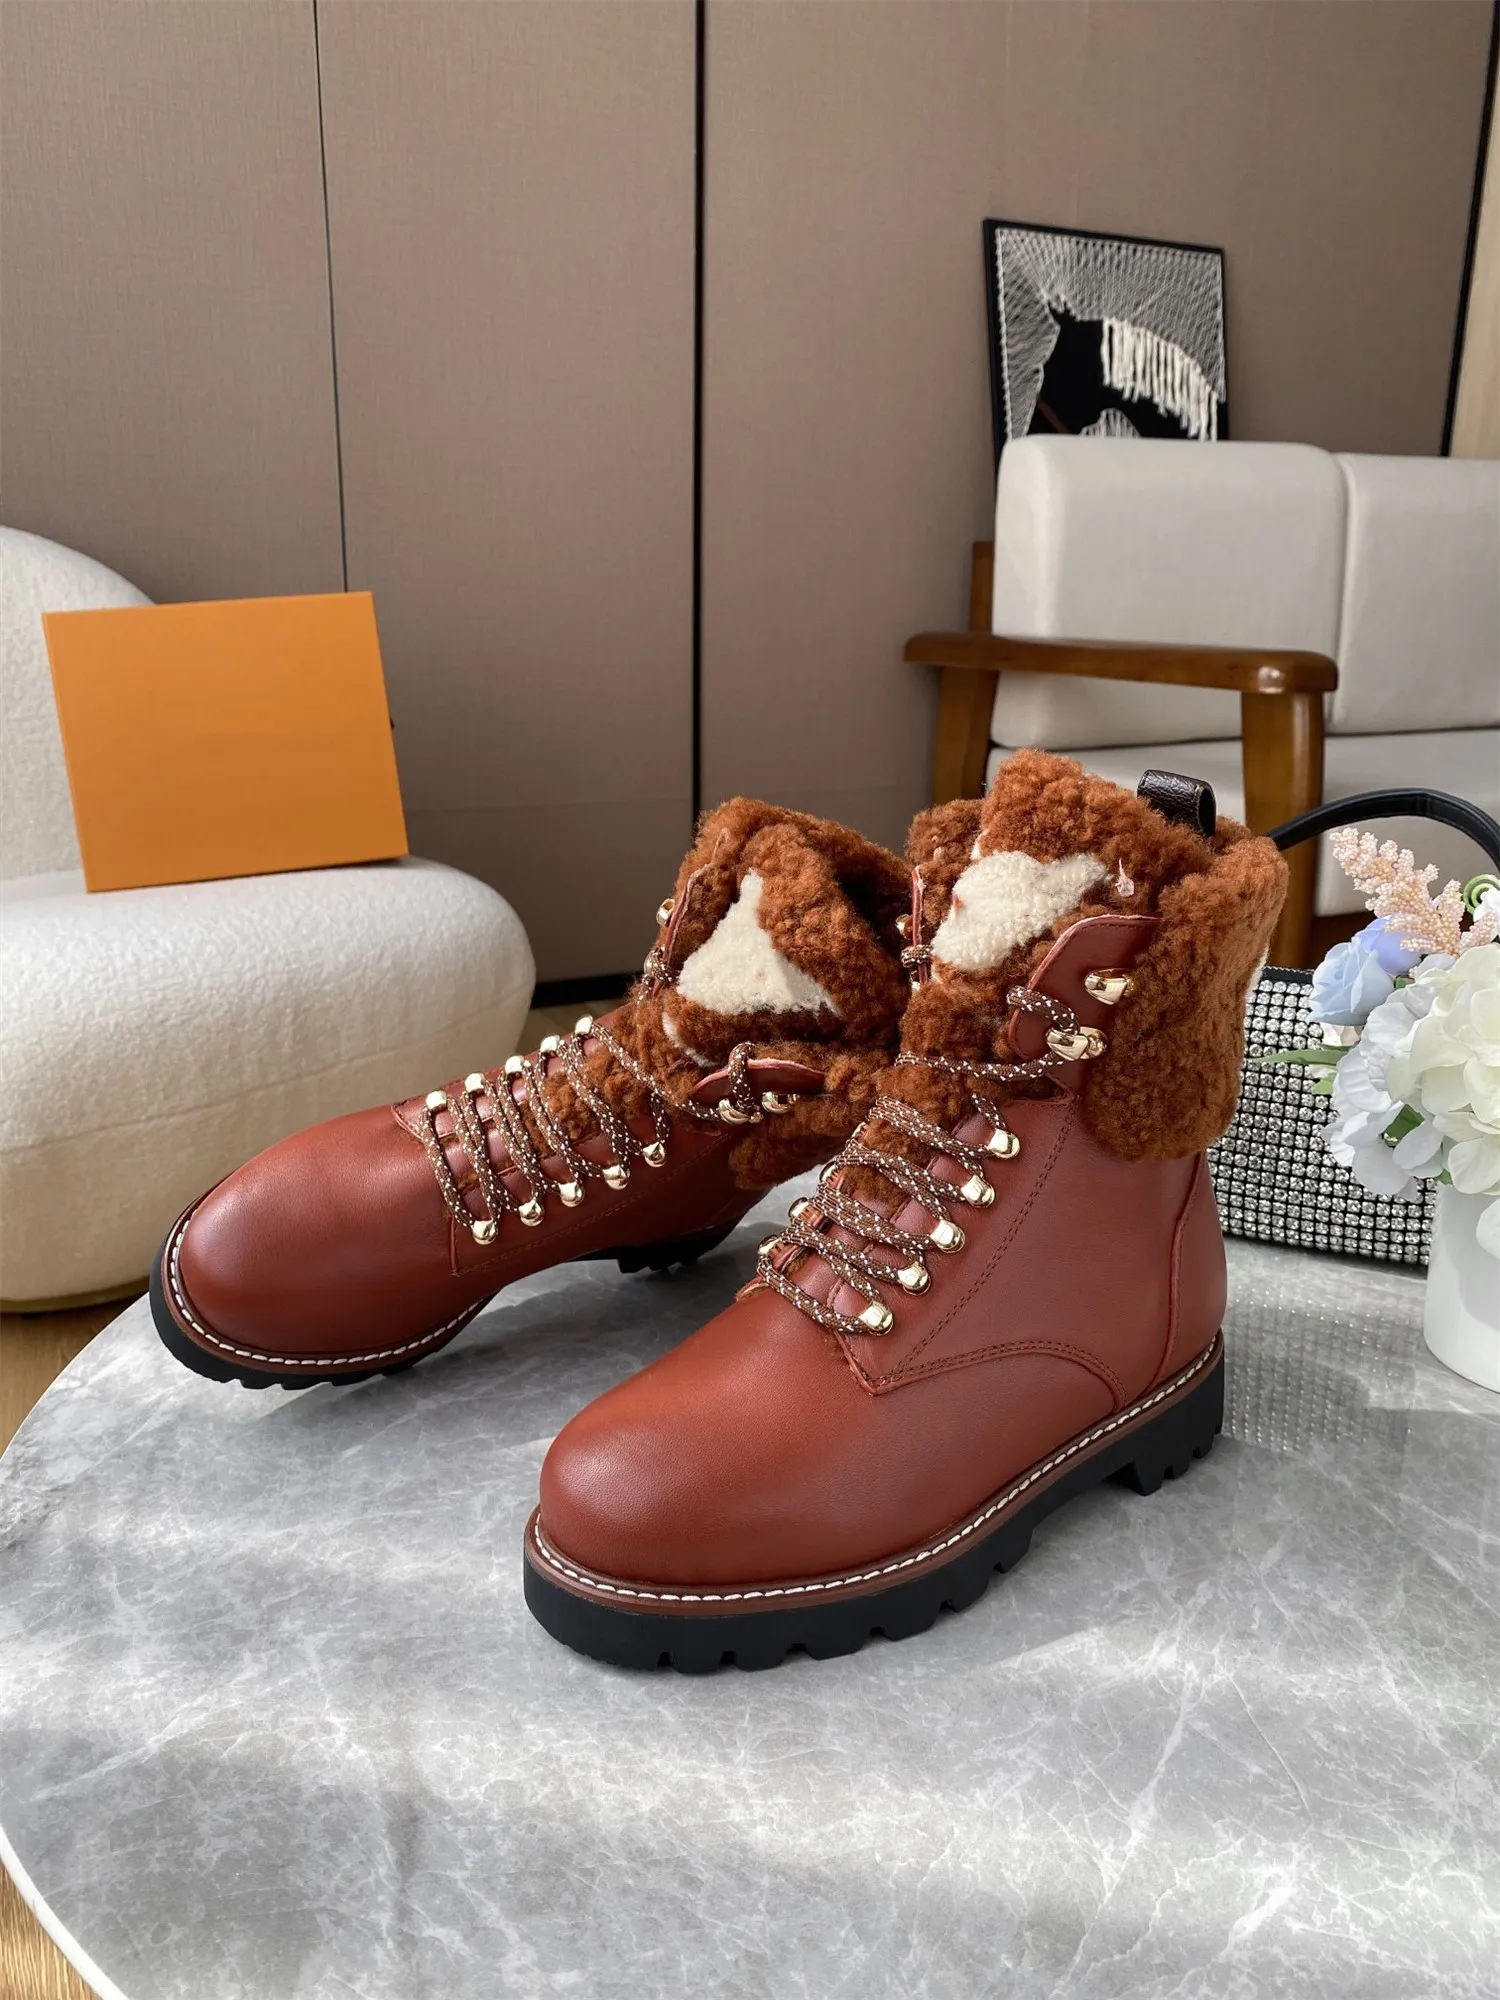 new arrived woman winter fashion wave heel short boots femal high quality patent leather chain decoration martin boots size 35-40